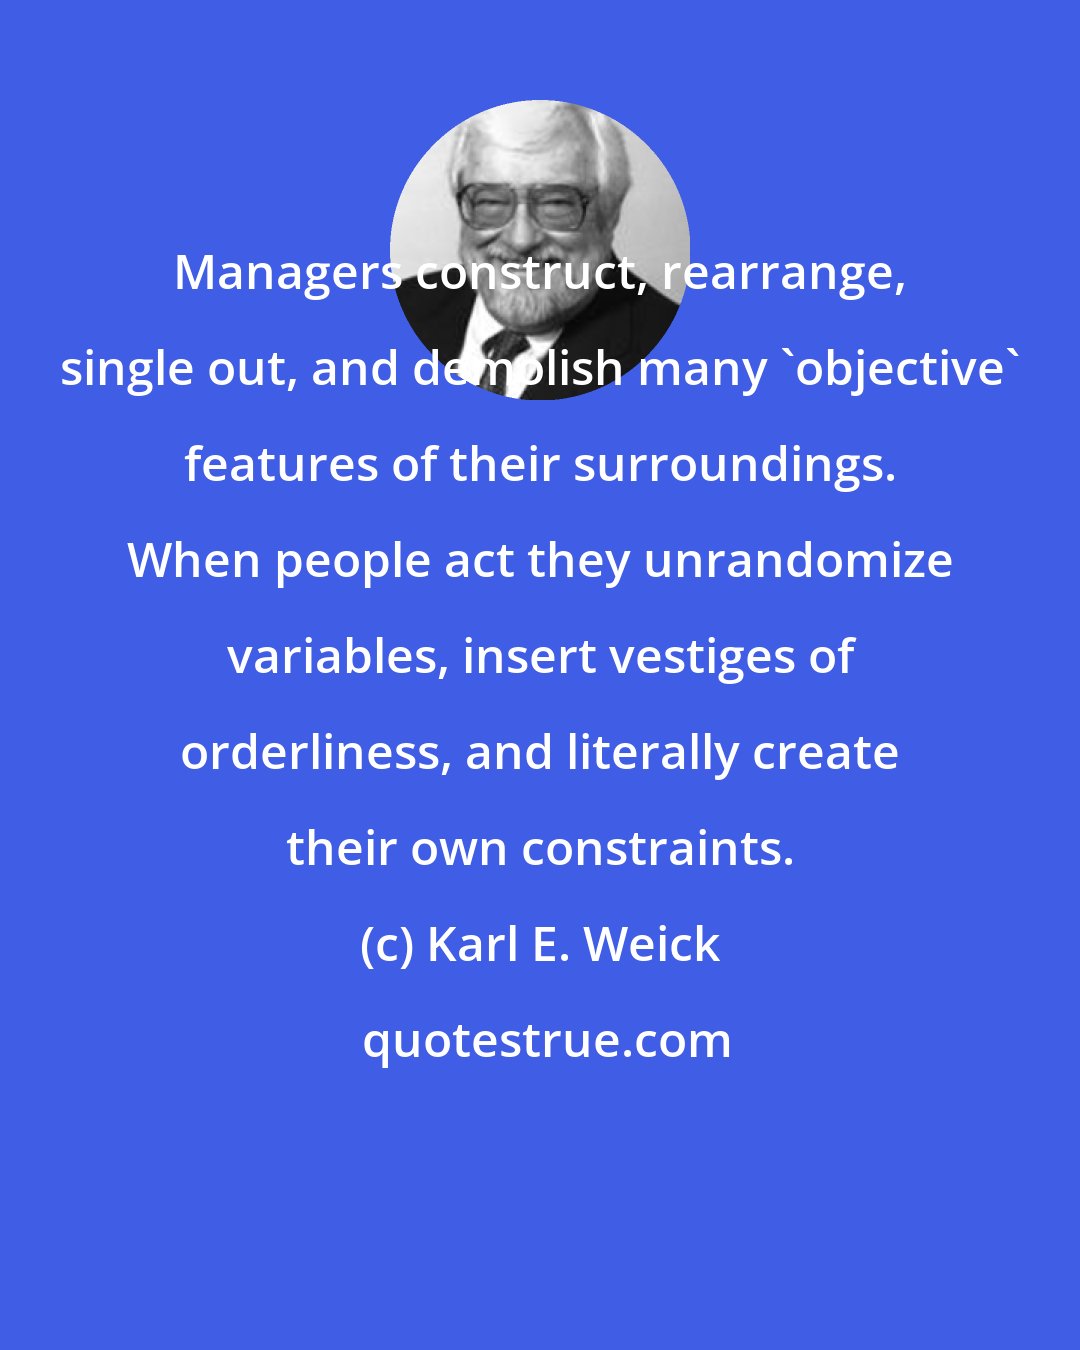 Karl E. Weick: Managers construct, rearrange, single out, and demolish many 'objective' features of their surroundings. When people act they unrandomize variables, insert vestiges of orderliness, and literally create their own constraints.